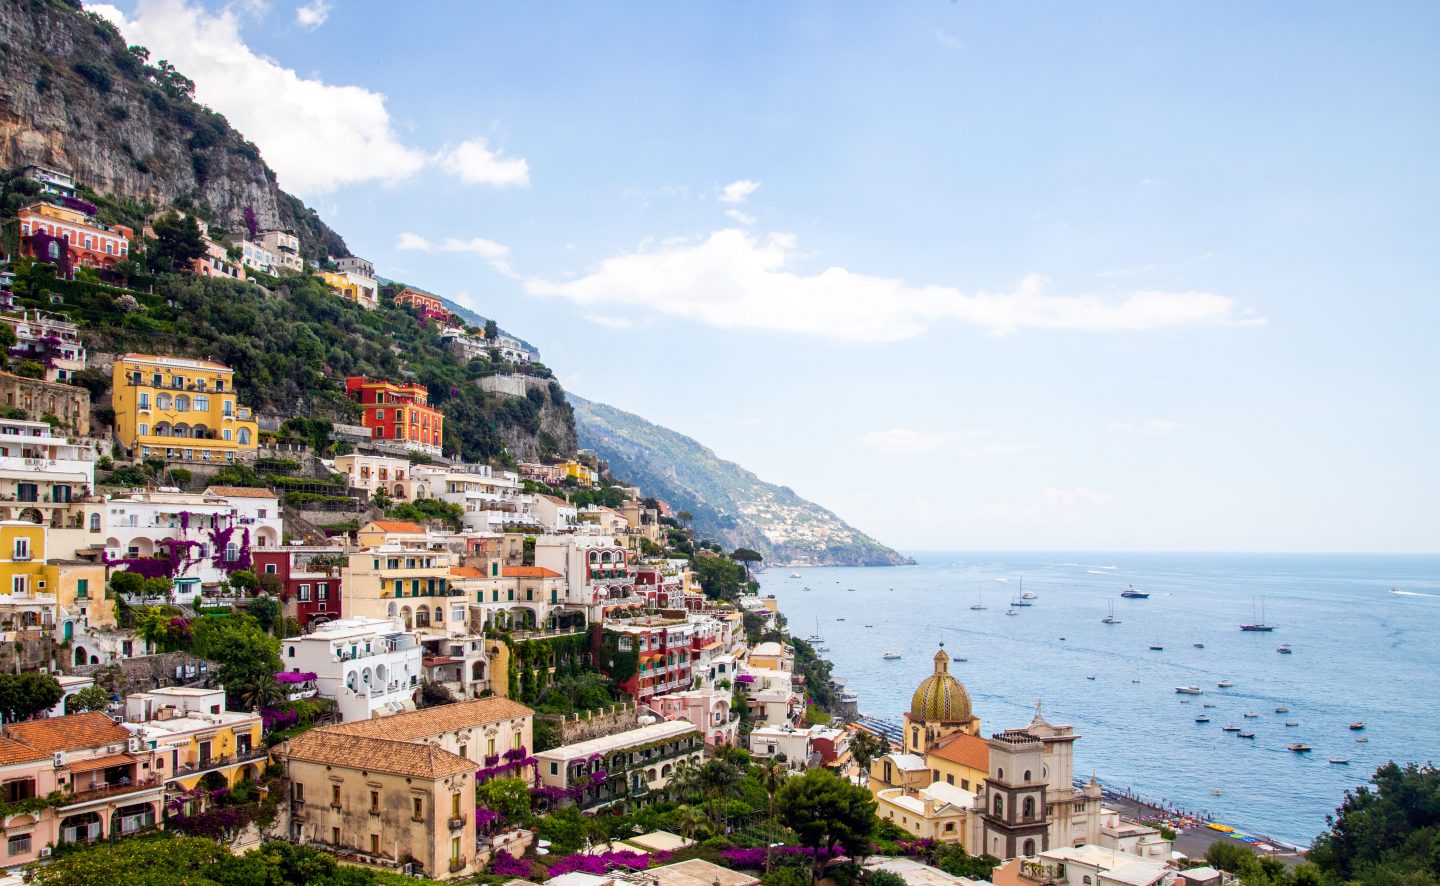 The coast of Italy with building along a tall hill and boats in the sea - one of 2023's best summer destinations.